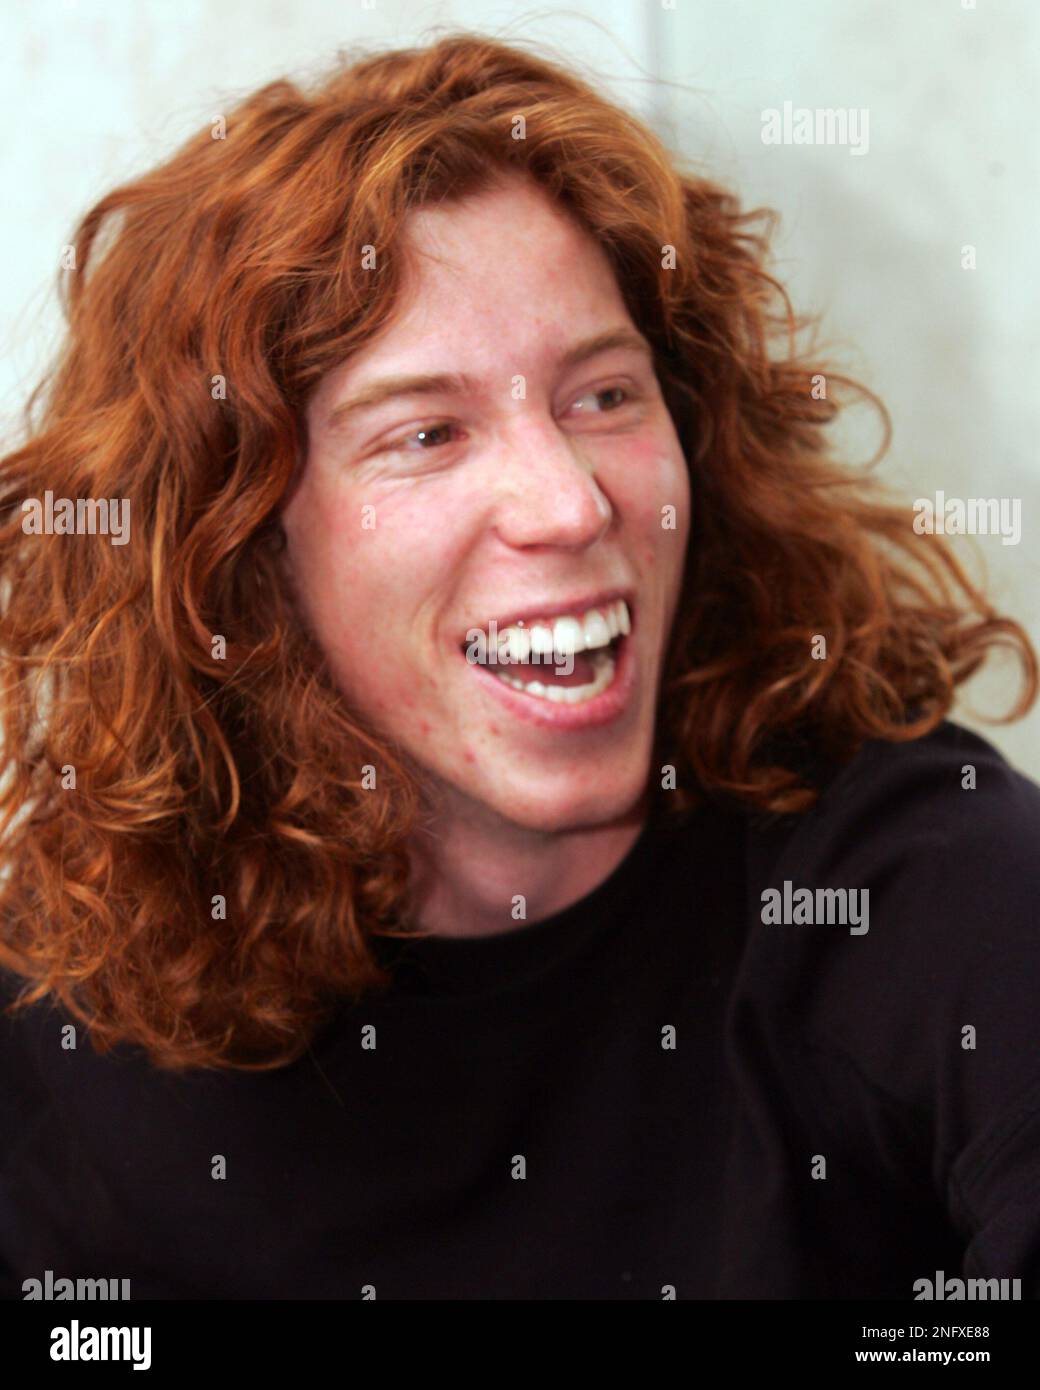 Snowboard Olympian, Shaun White of Carlsbad, Calif., is interviewed at the  Winter X Games on Thursday, Jan., 24, 2008 in Aspen, Colo. White will be  competing in the Slopestyle and Superpipe competitions